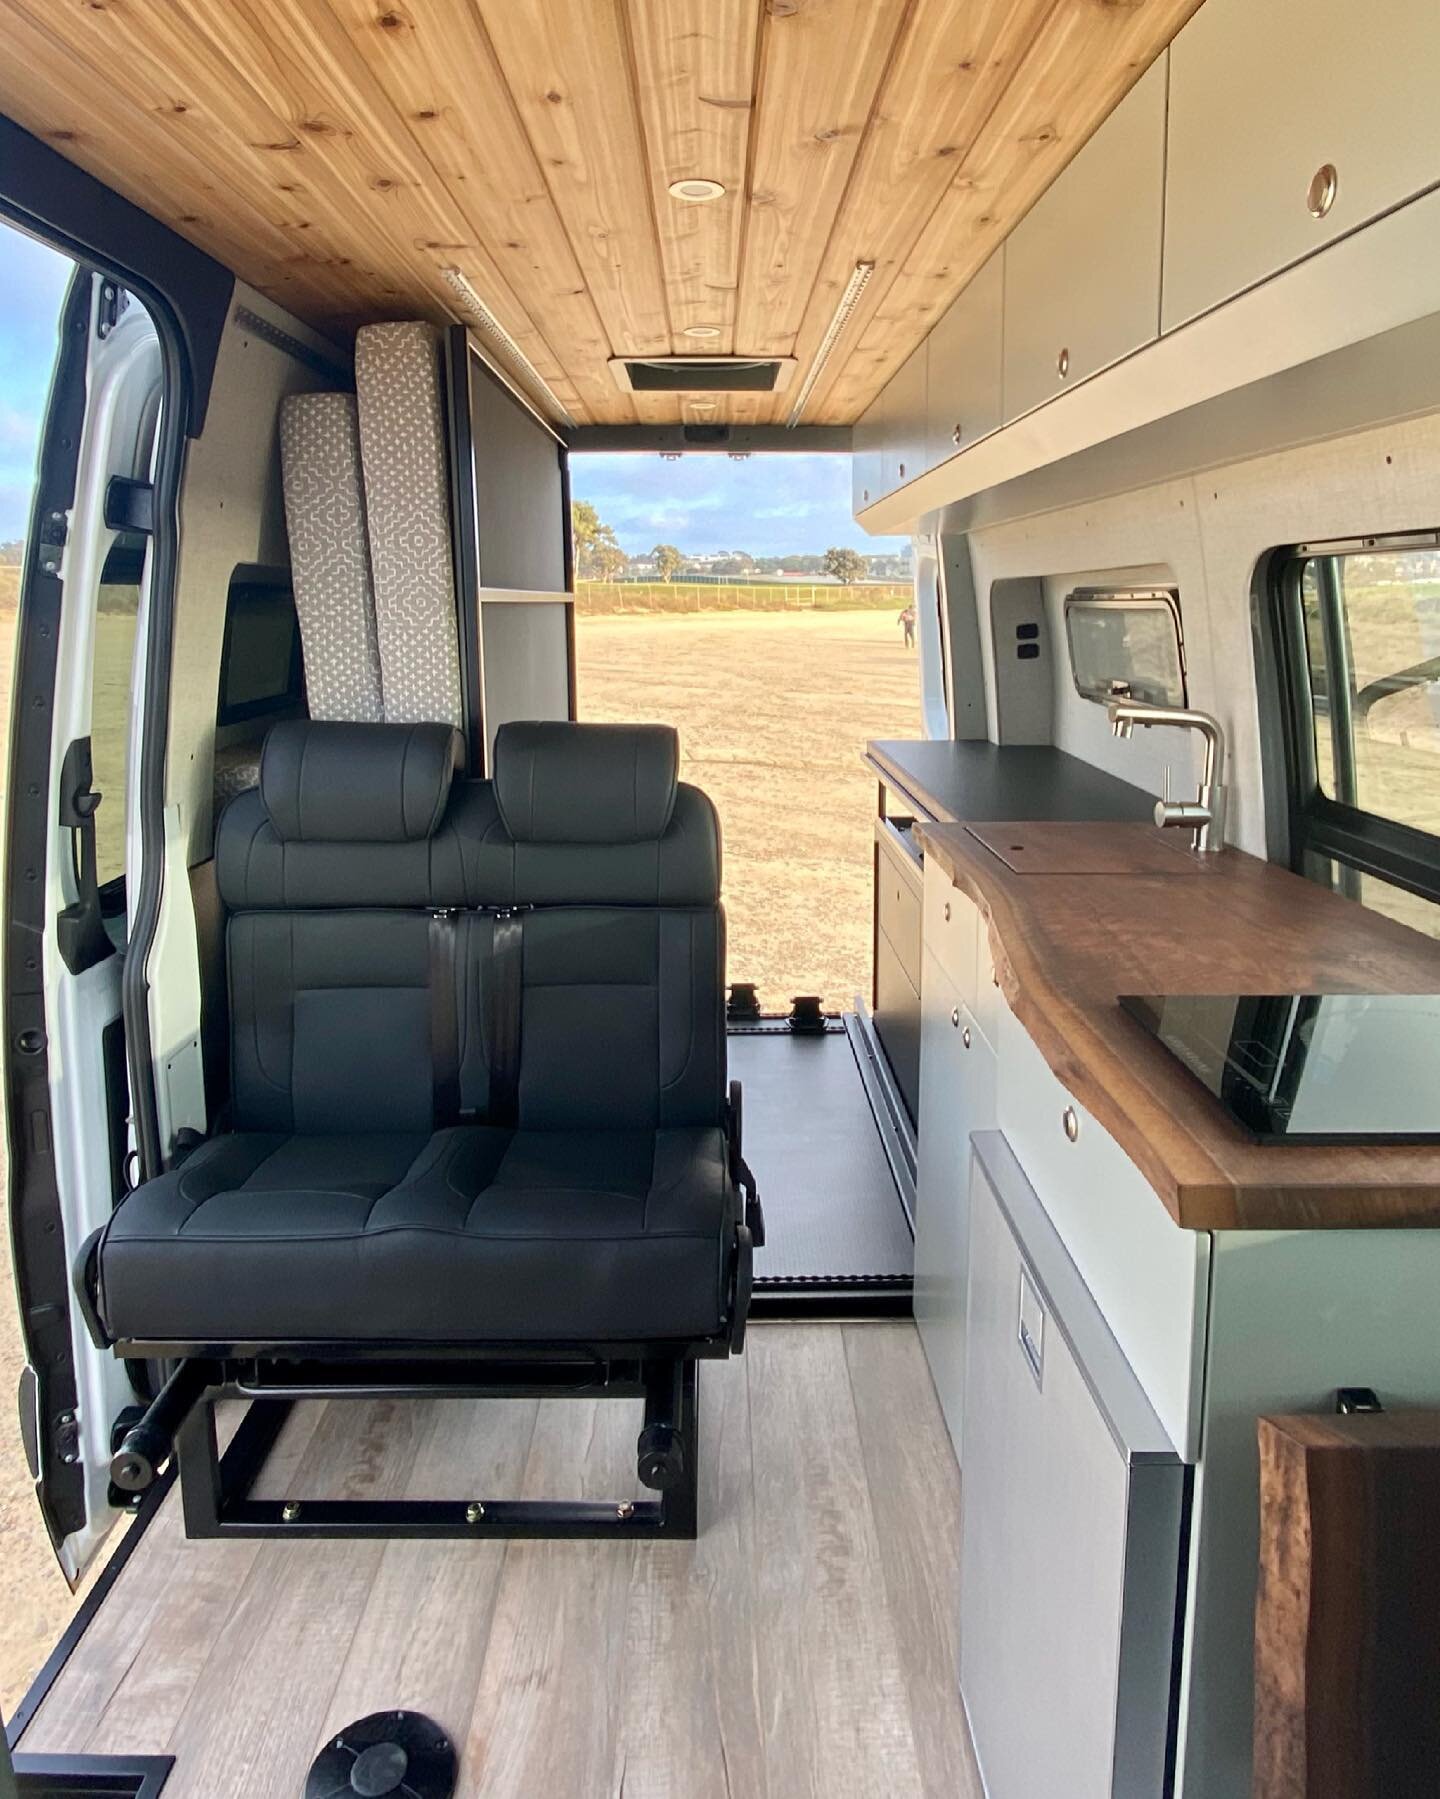 Here it is! Our version of a Murphy bed build in a 144 Sprinter.